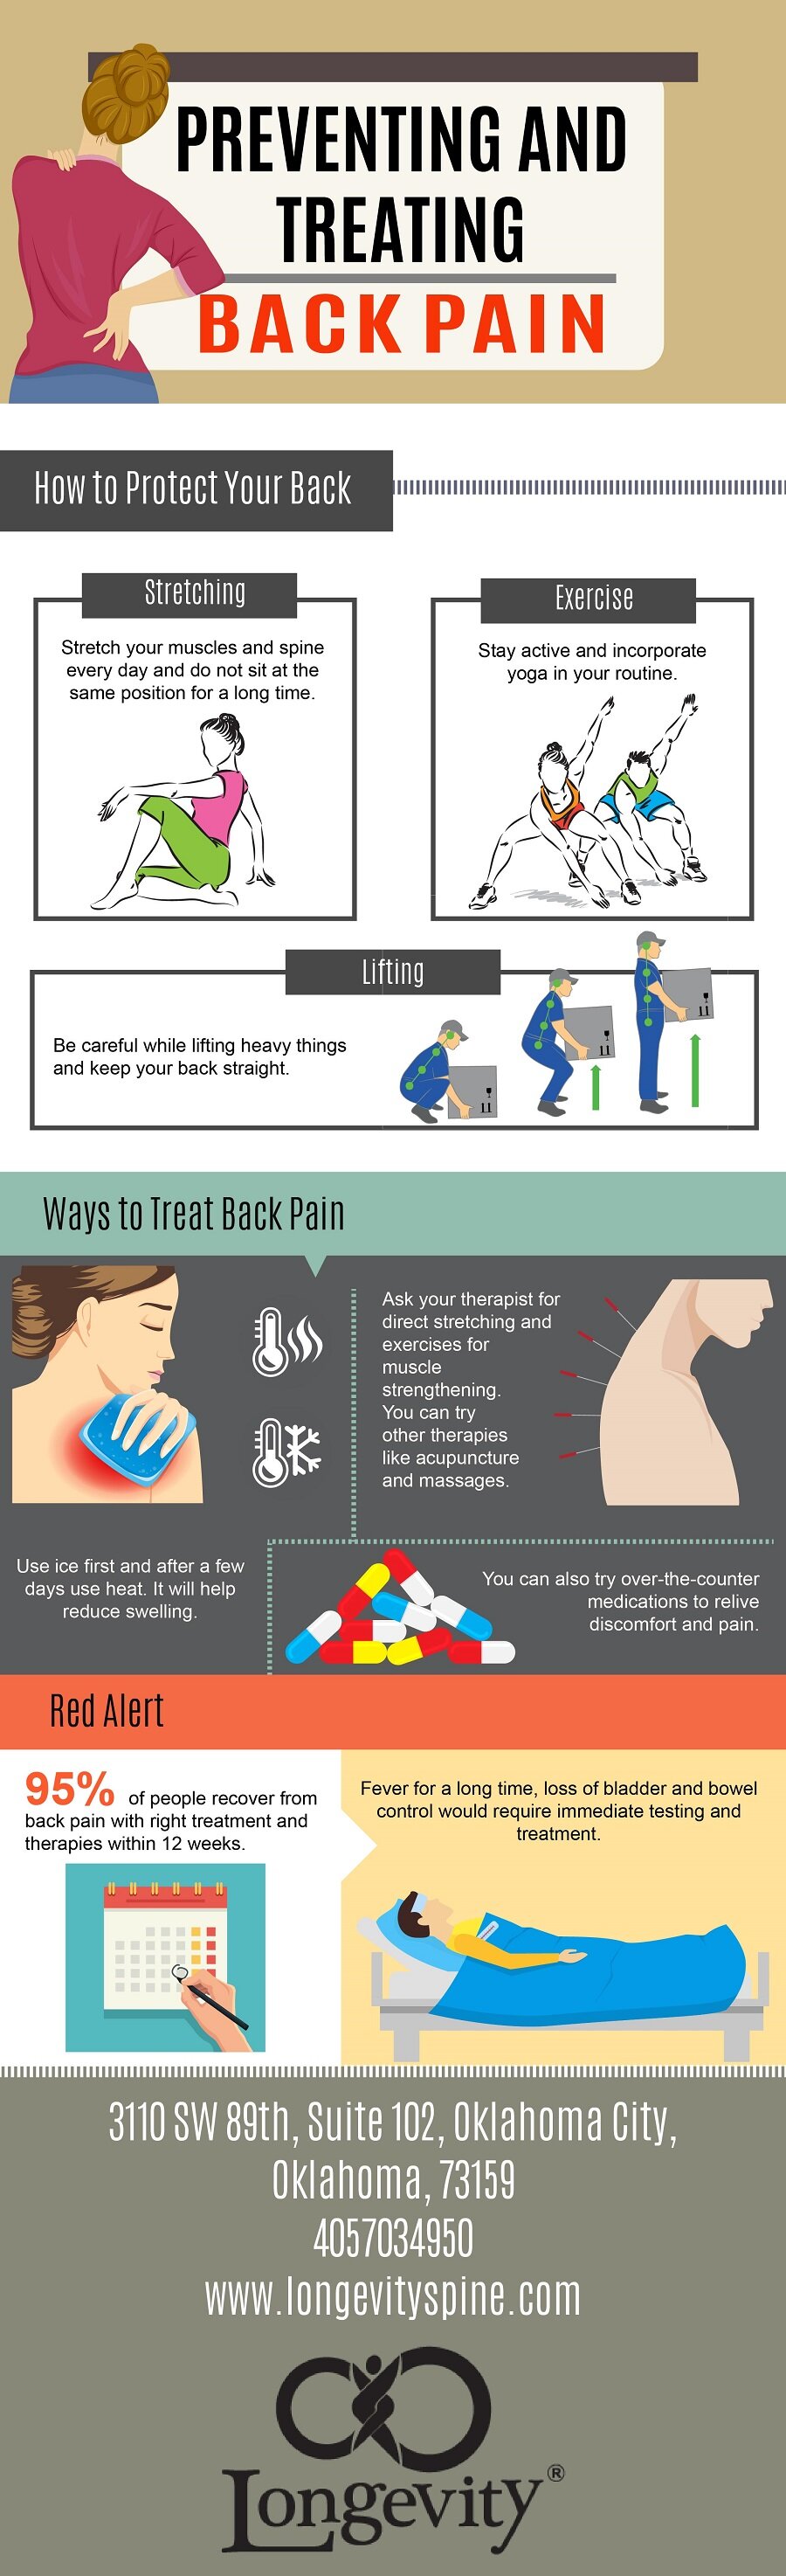 back pain treatment infographic